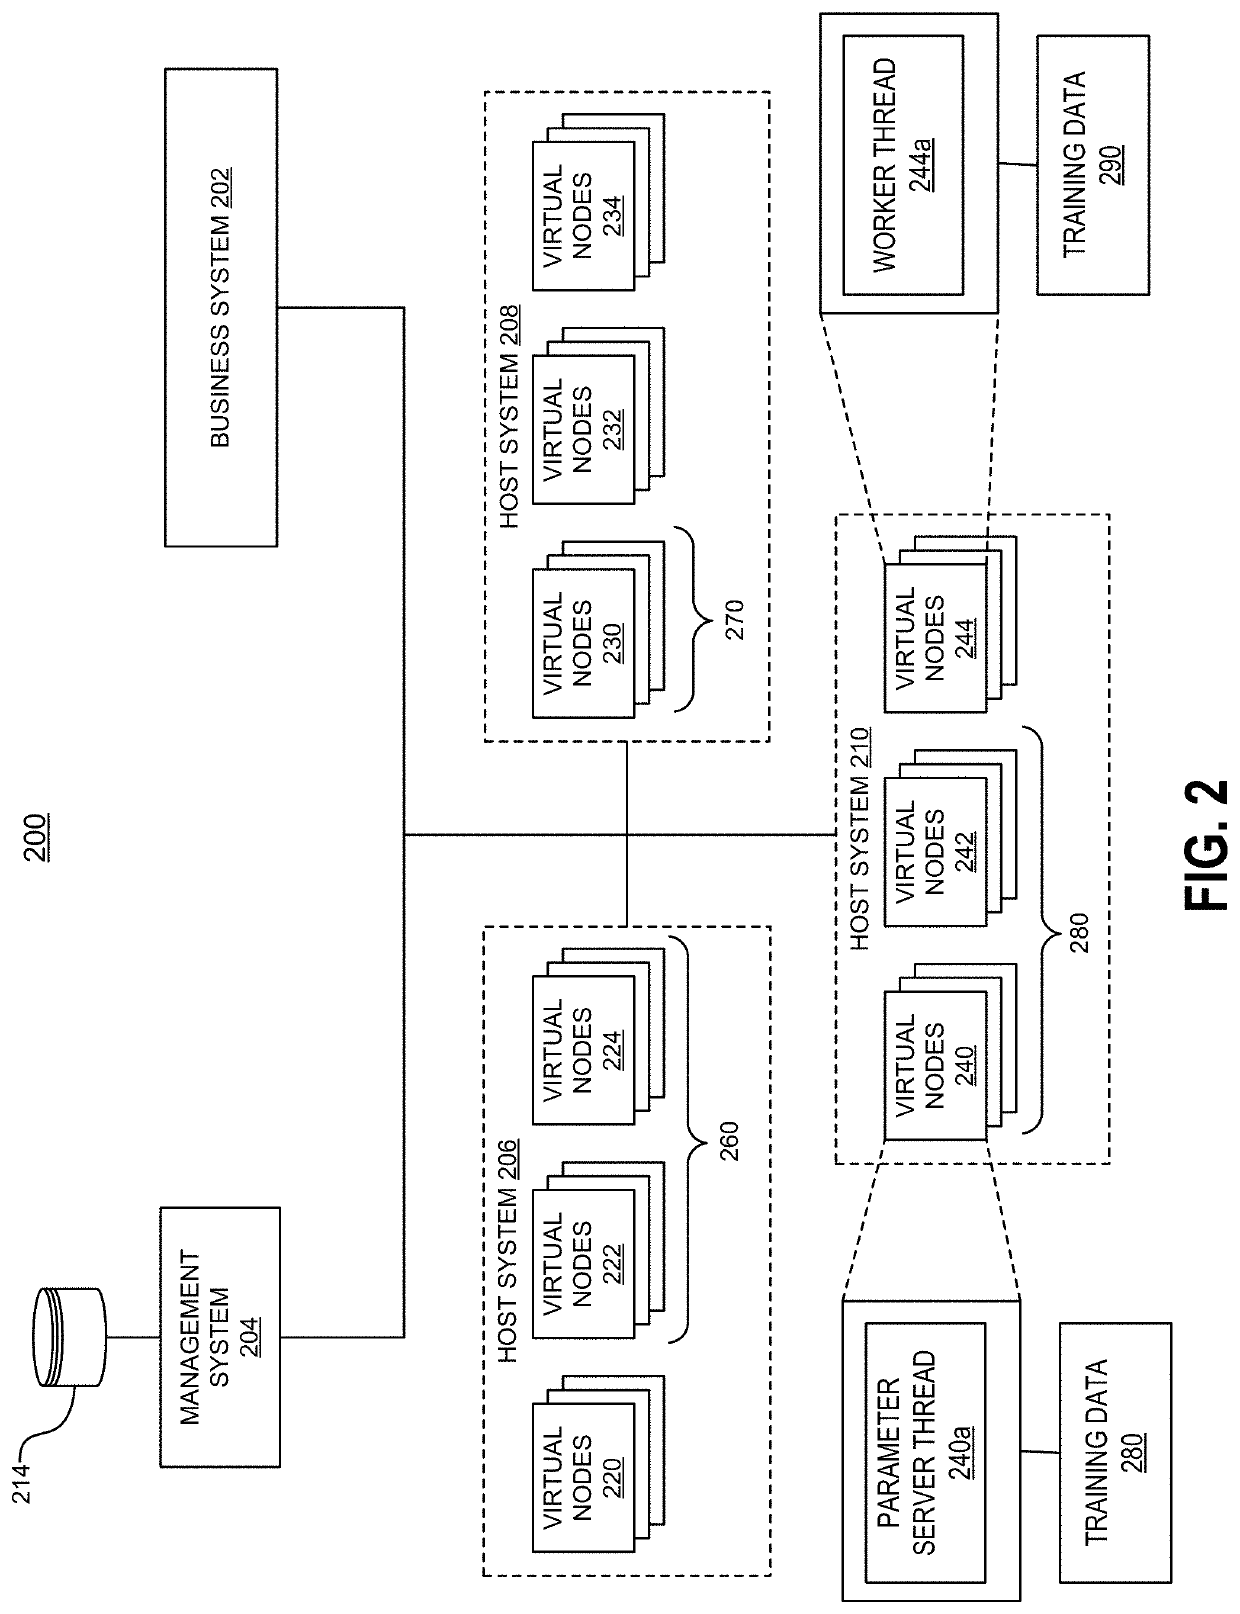 Systems and methods of resource configuration optimization for machine learning workloads